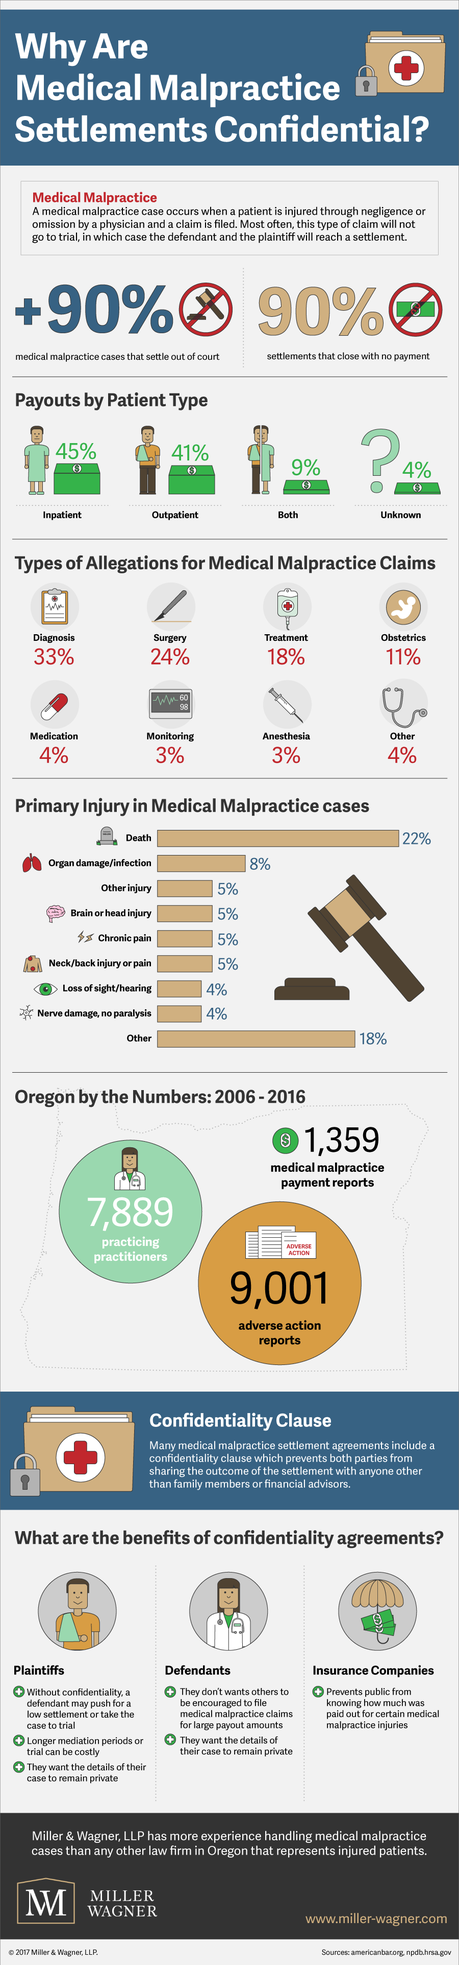 Why Are Medical Malpractice Settlements Confidential?